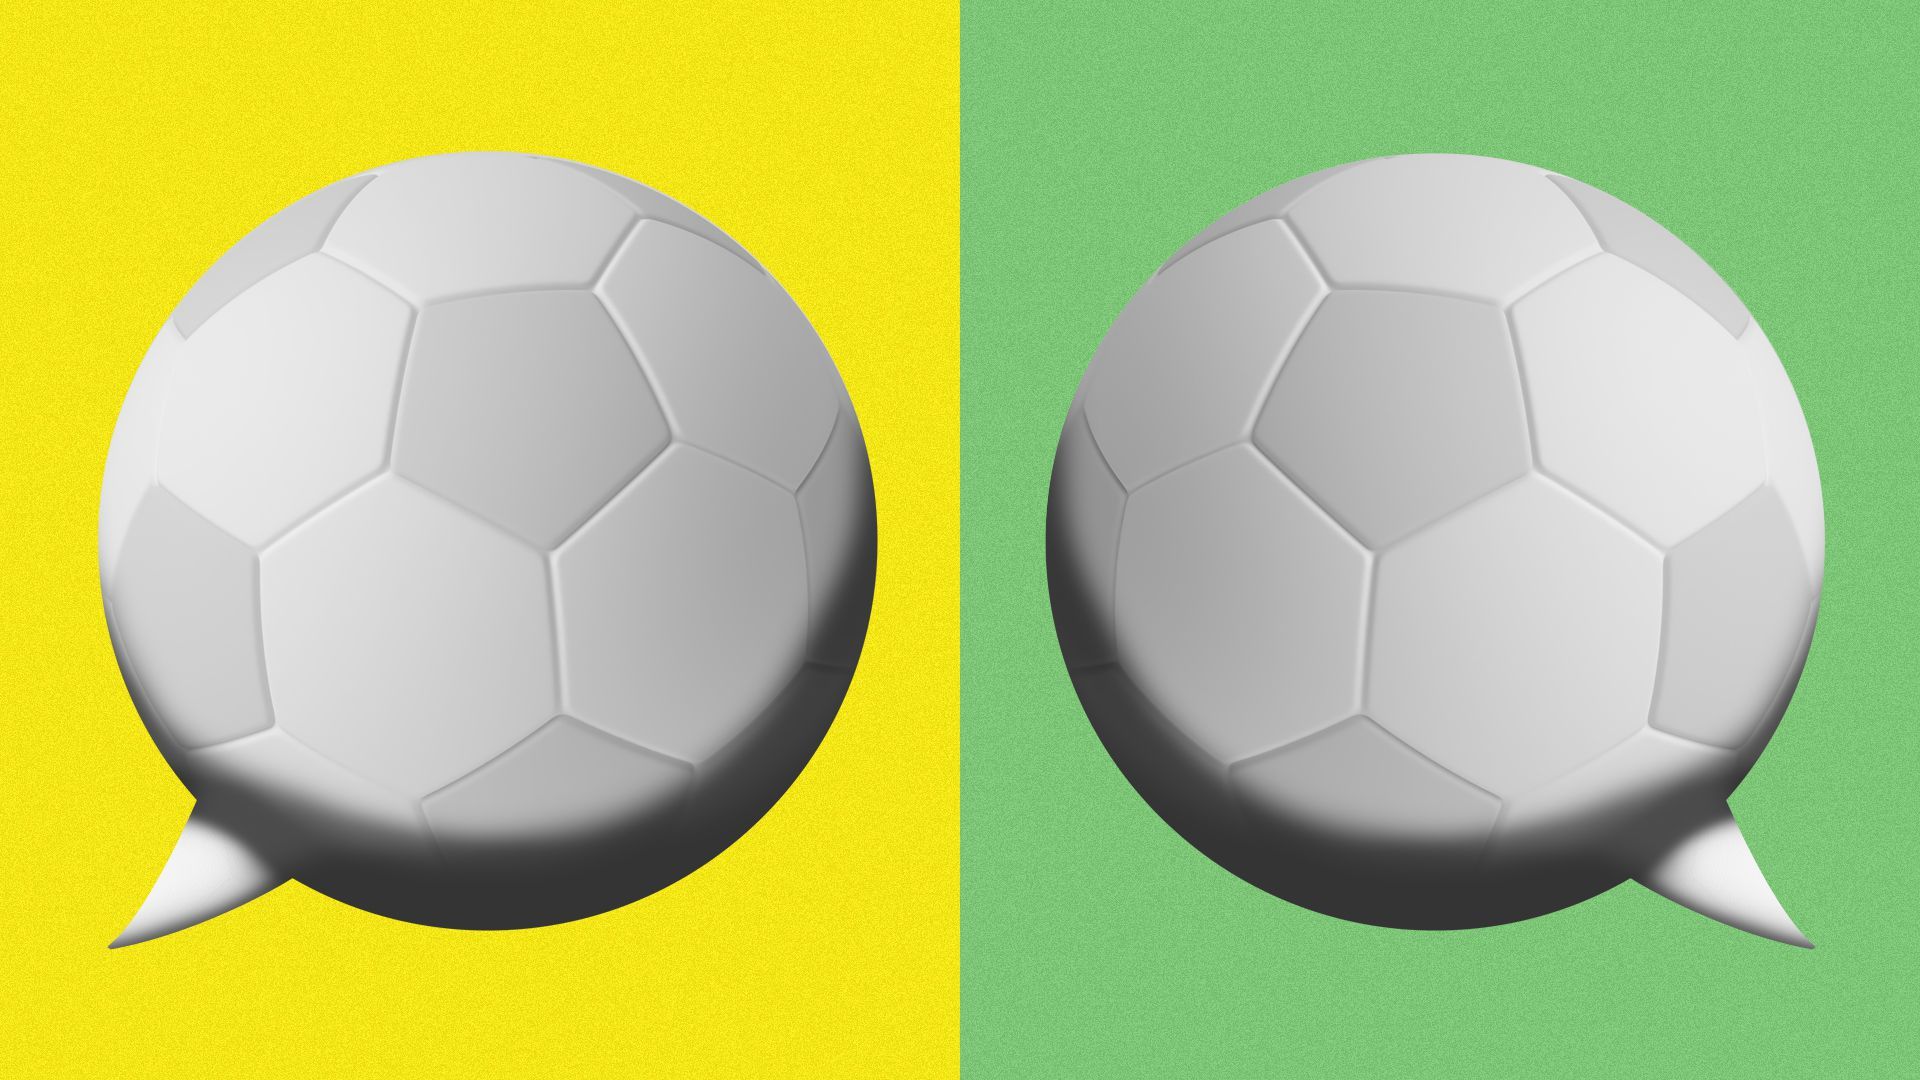 Illustration of two soccer balls that look like word bubbles facing each other